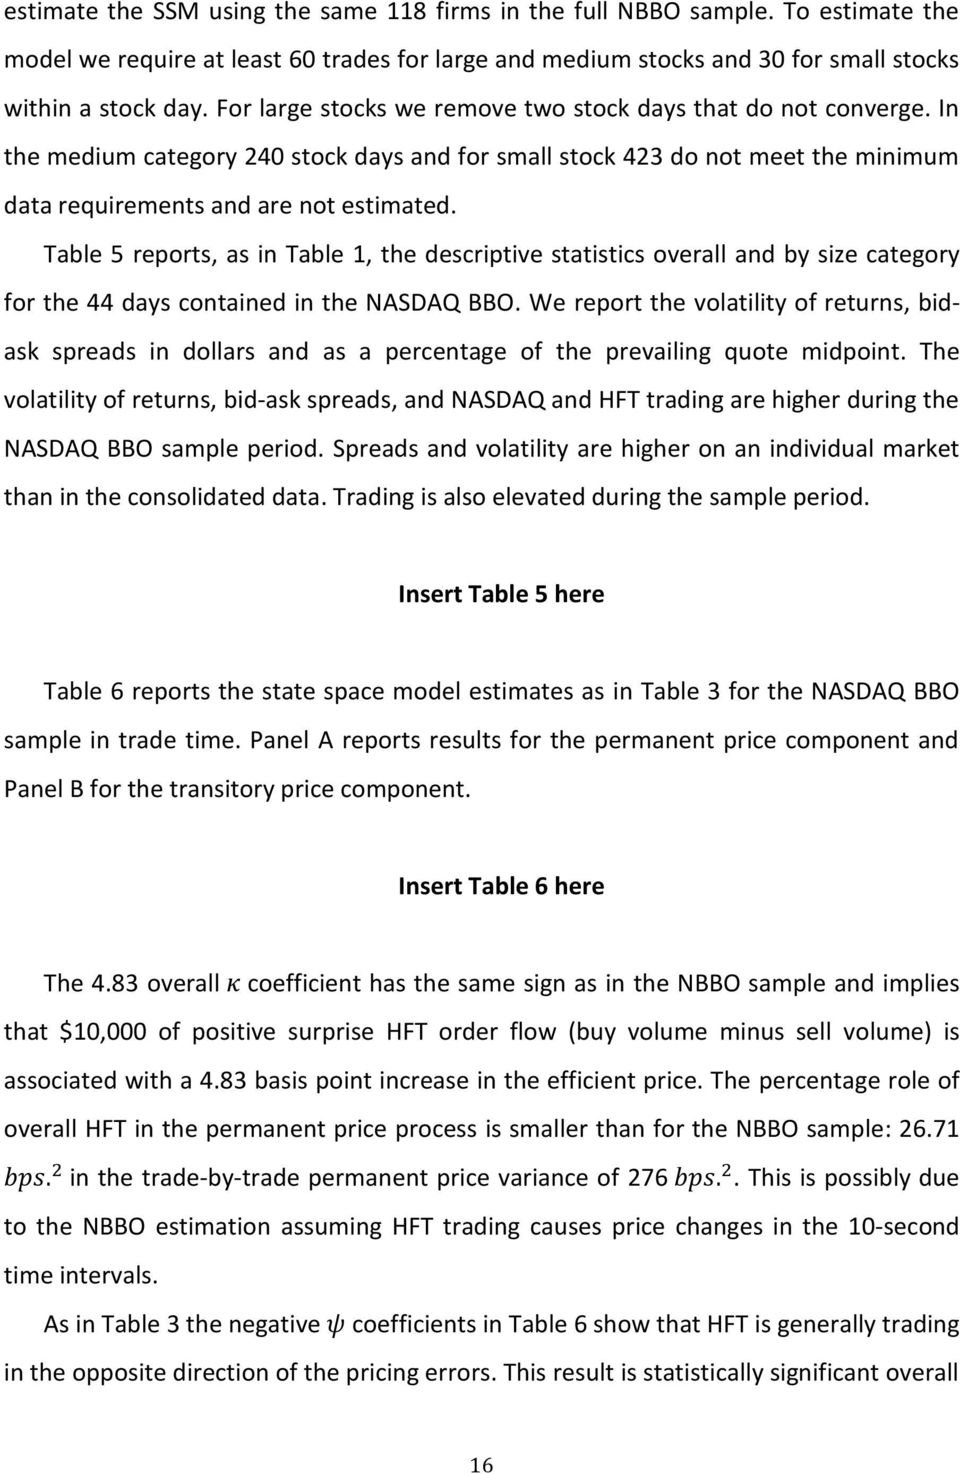 Table 5 reports, as in Table 1, the descriptive statistics overall and by size category for the 44 days contained in the NASDAQ BBO.